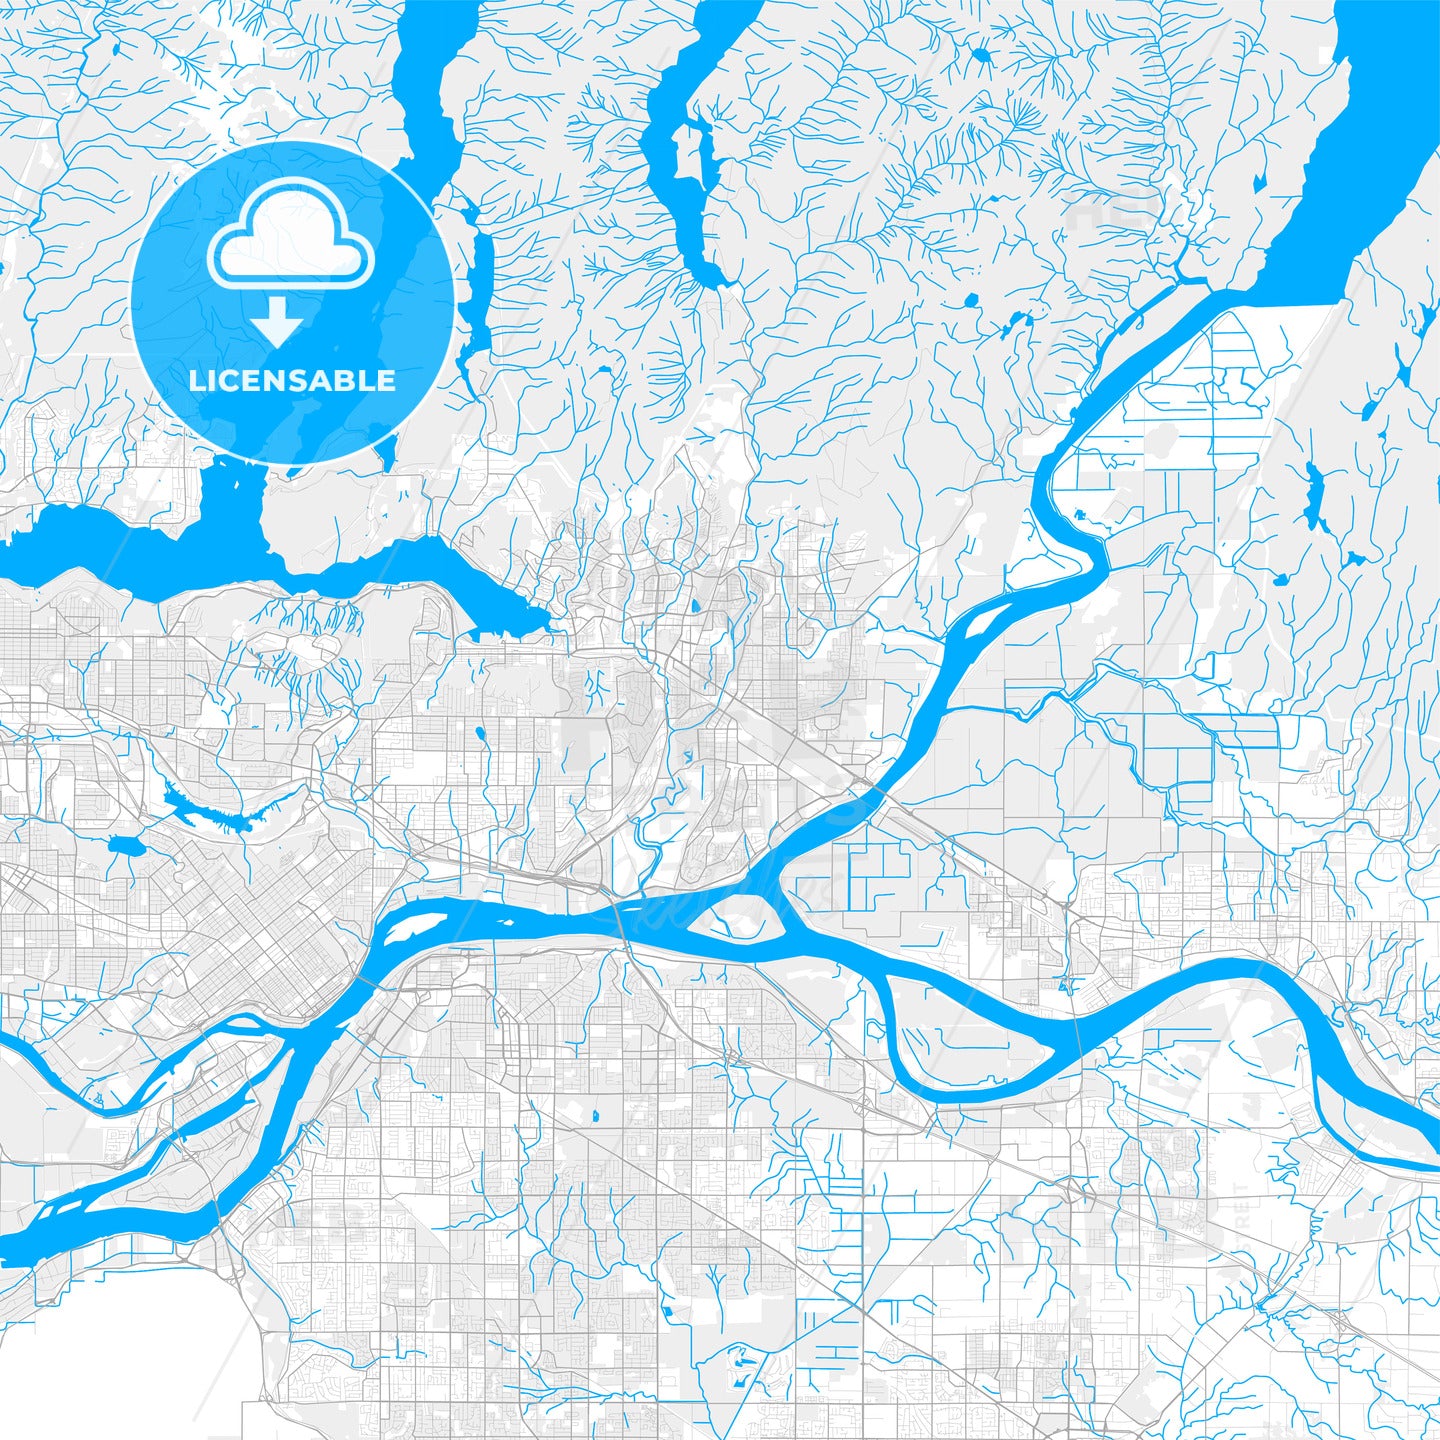 Rich detailed vector map of Port Coquitlam, British Columbia, Canada